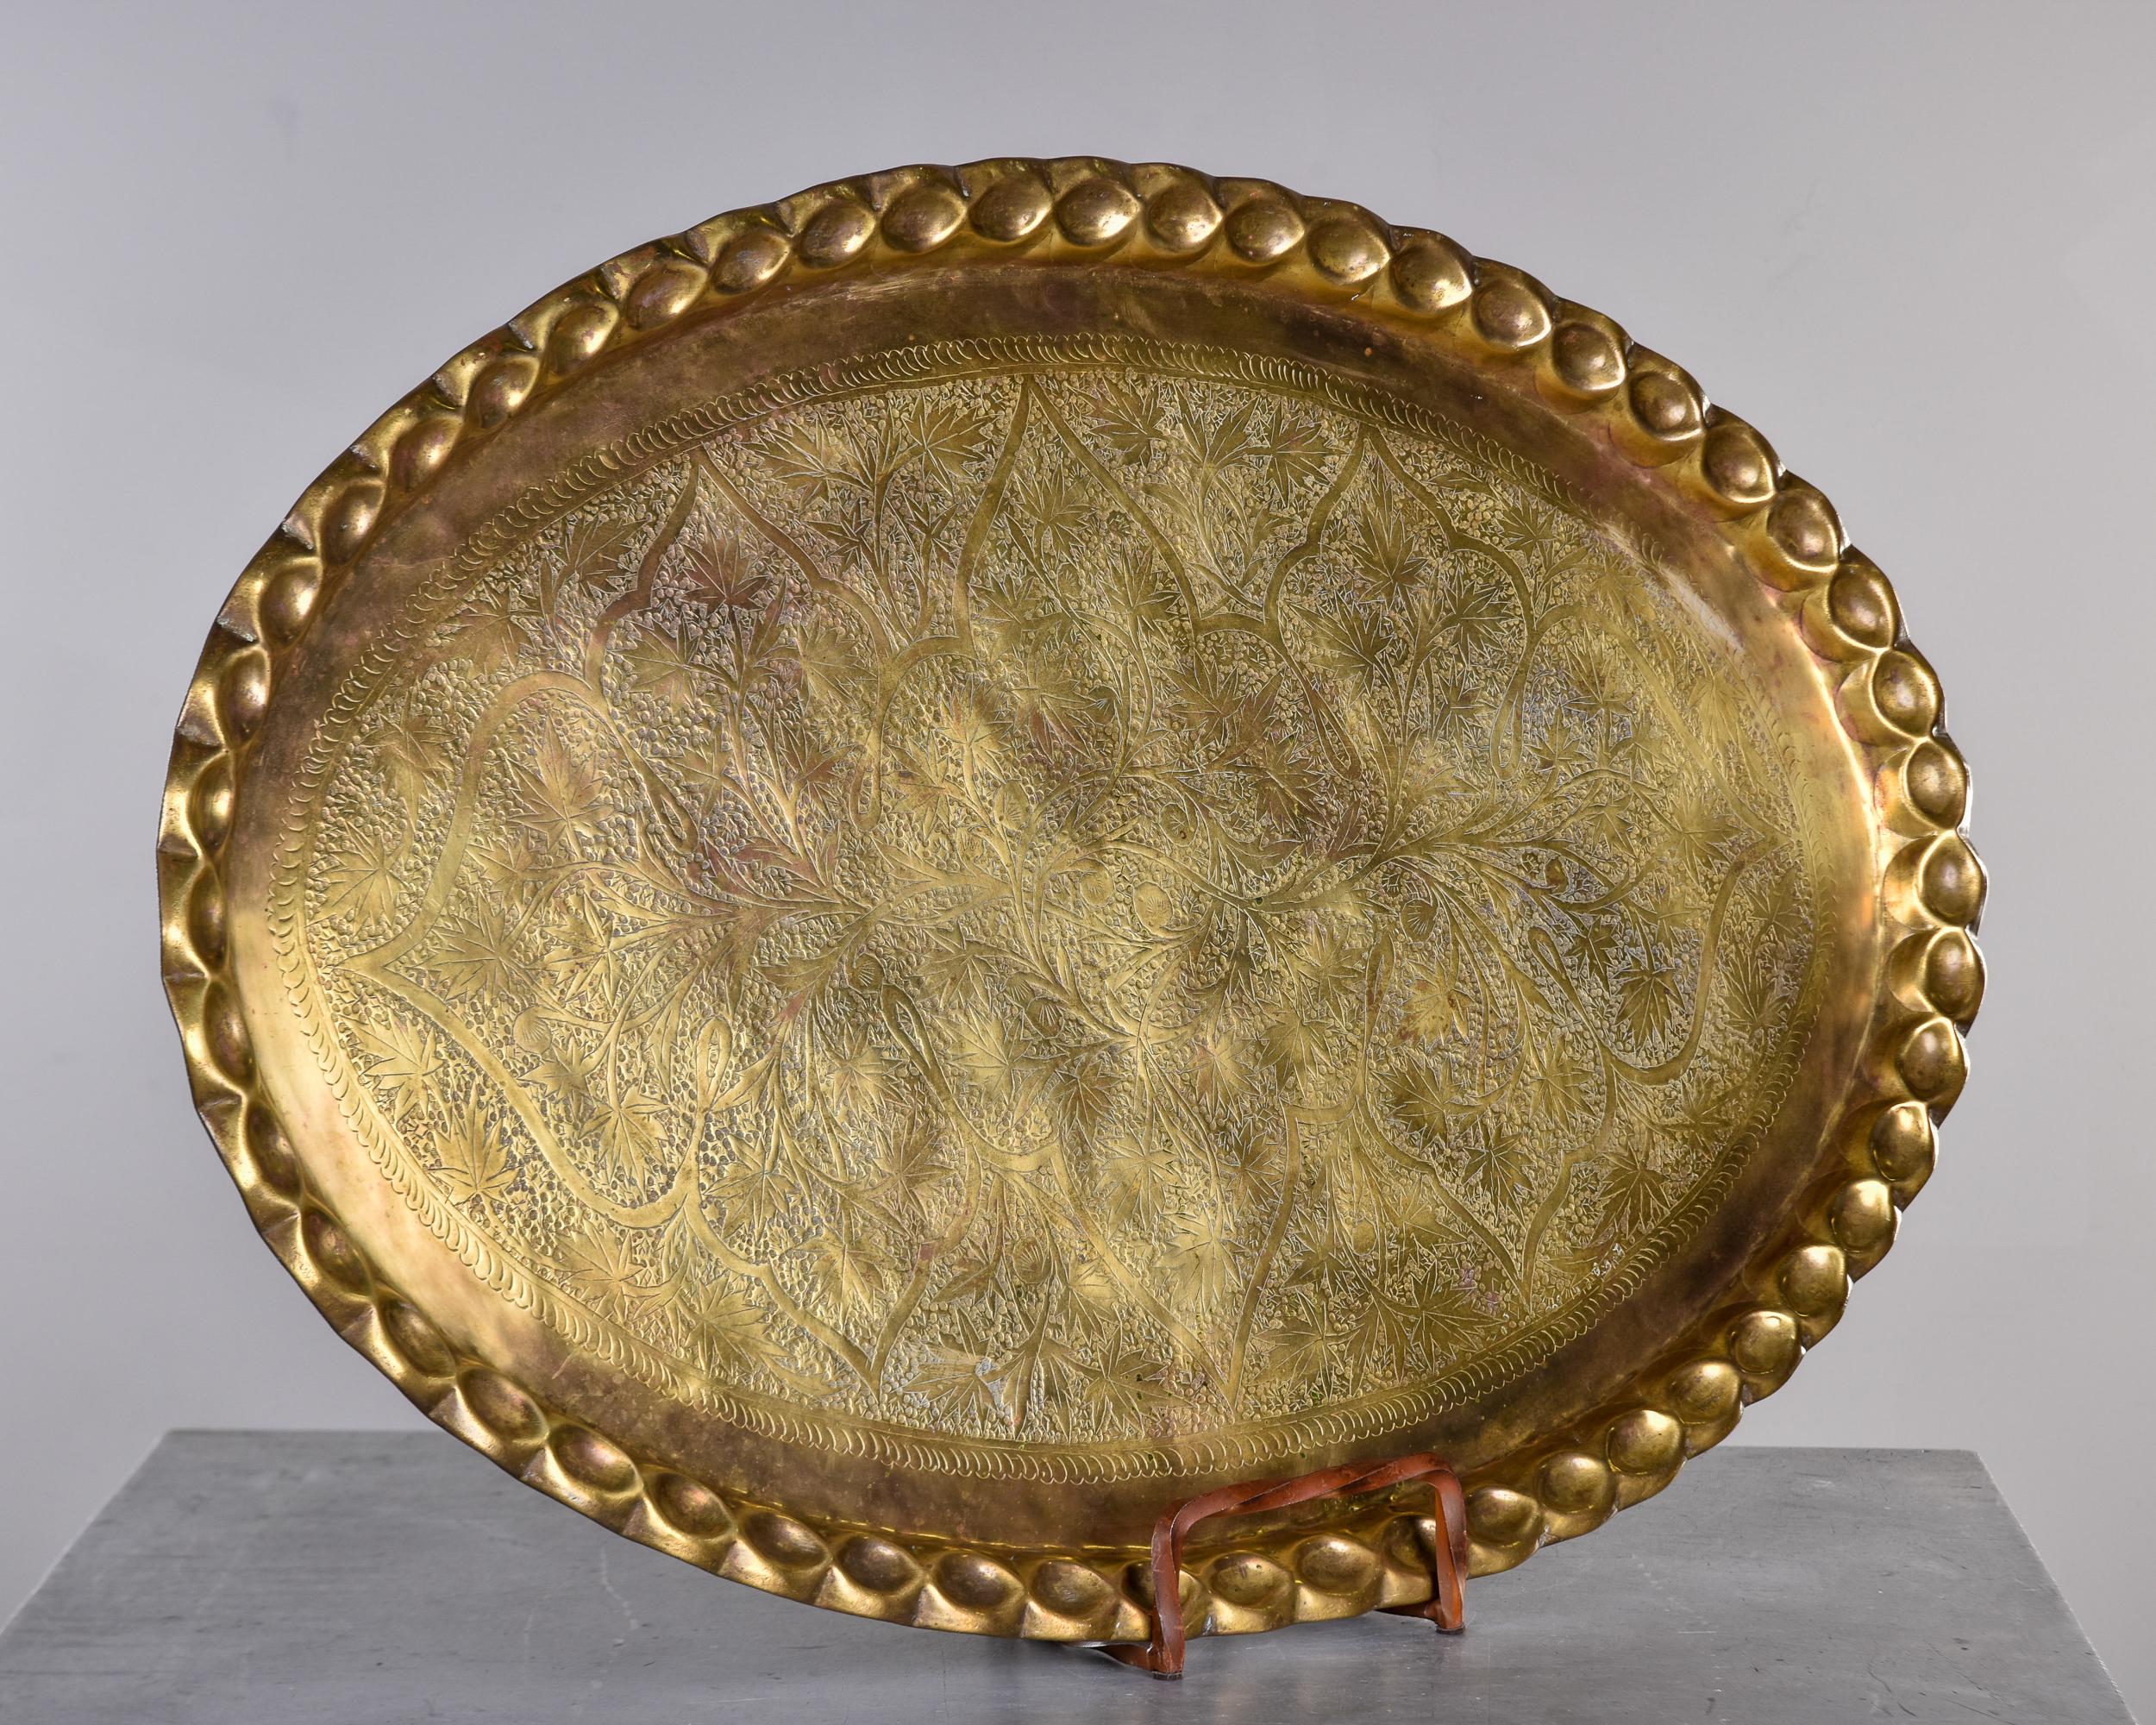 20th Century XL Vintage Brass Tray or Table Top with Scalloped Edge and Etched Leaf Design